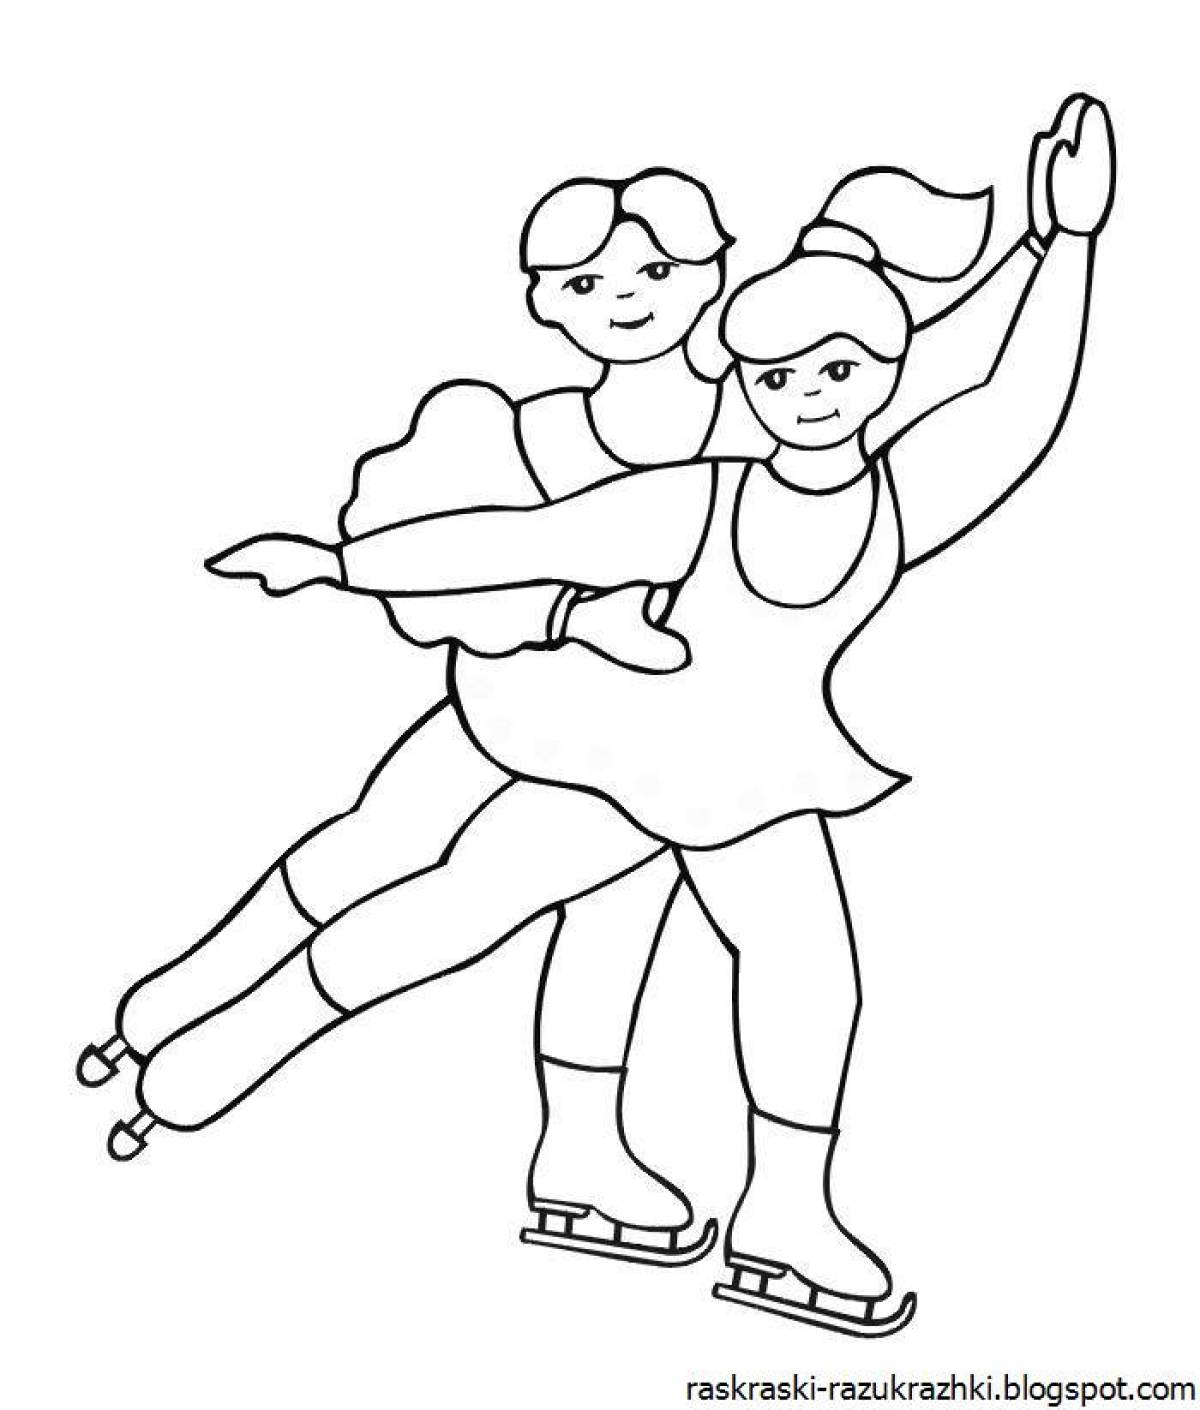 Adorable figure skating coloring page